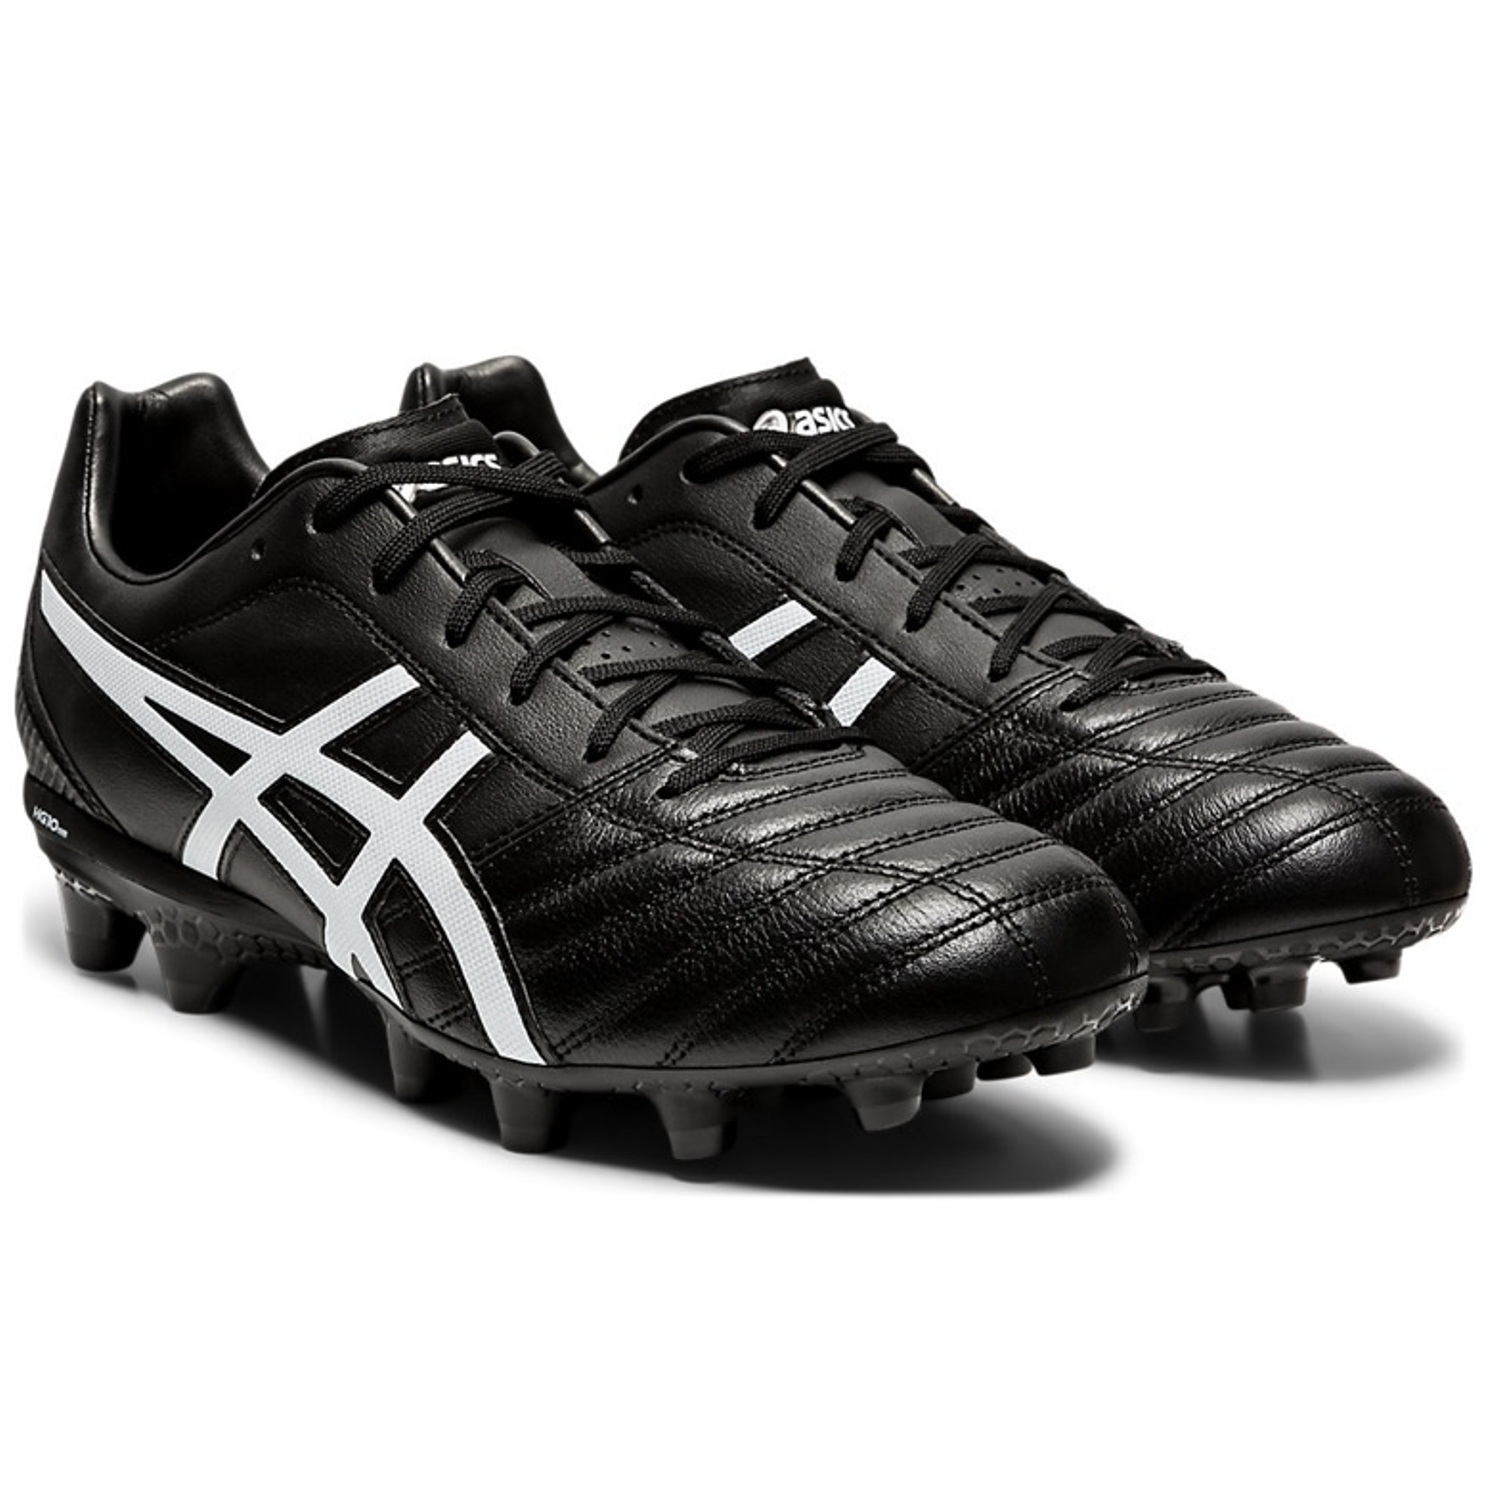 black and white asics football boots